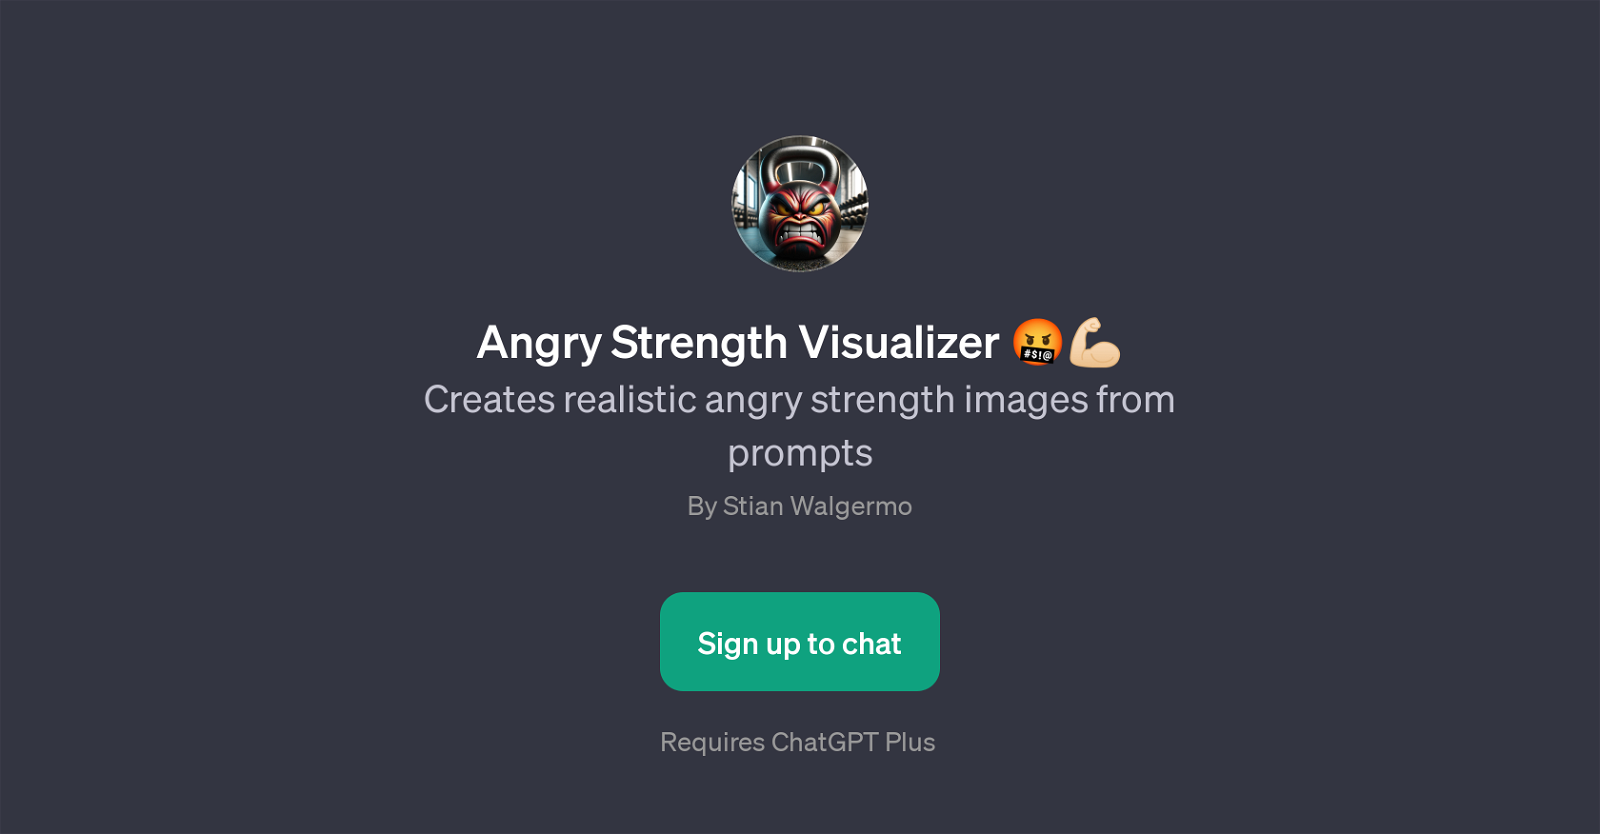 Angry Strength Visualizer website